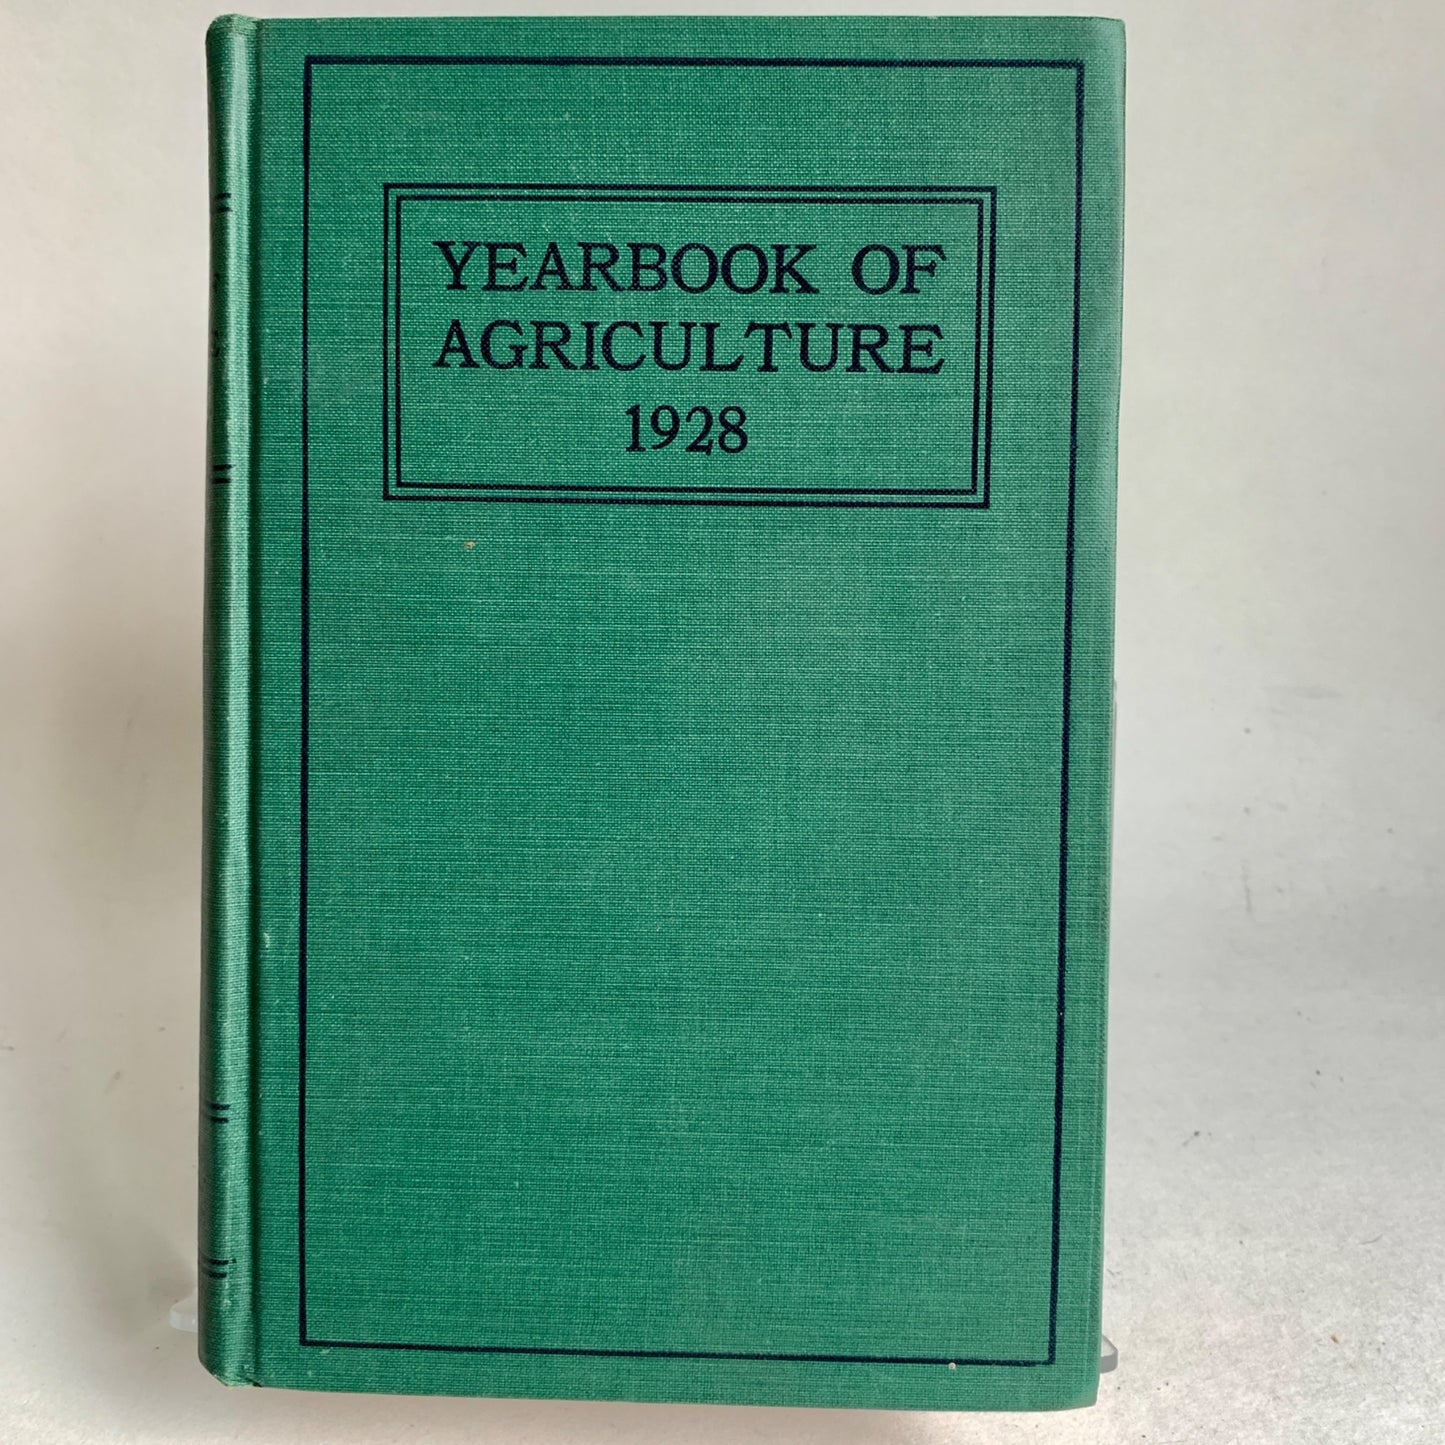 1928 Yearbook of Agriculture Hardcover Vintage Book Antique